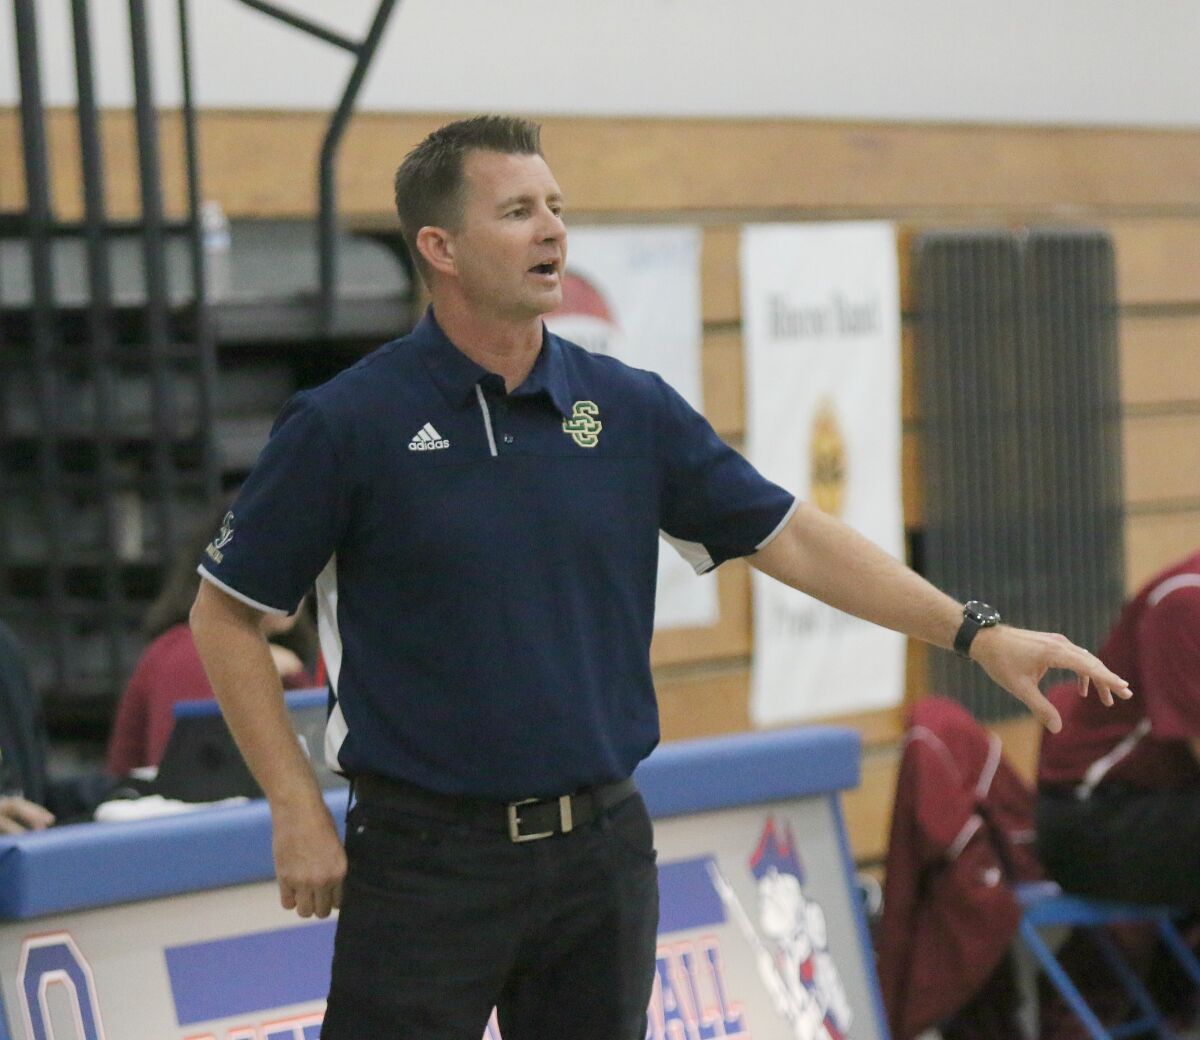 Cassaw has been La Costa Canyon's head coach for 23 seasons.